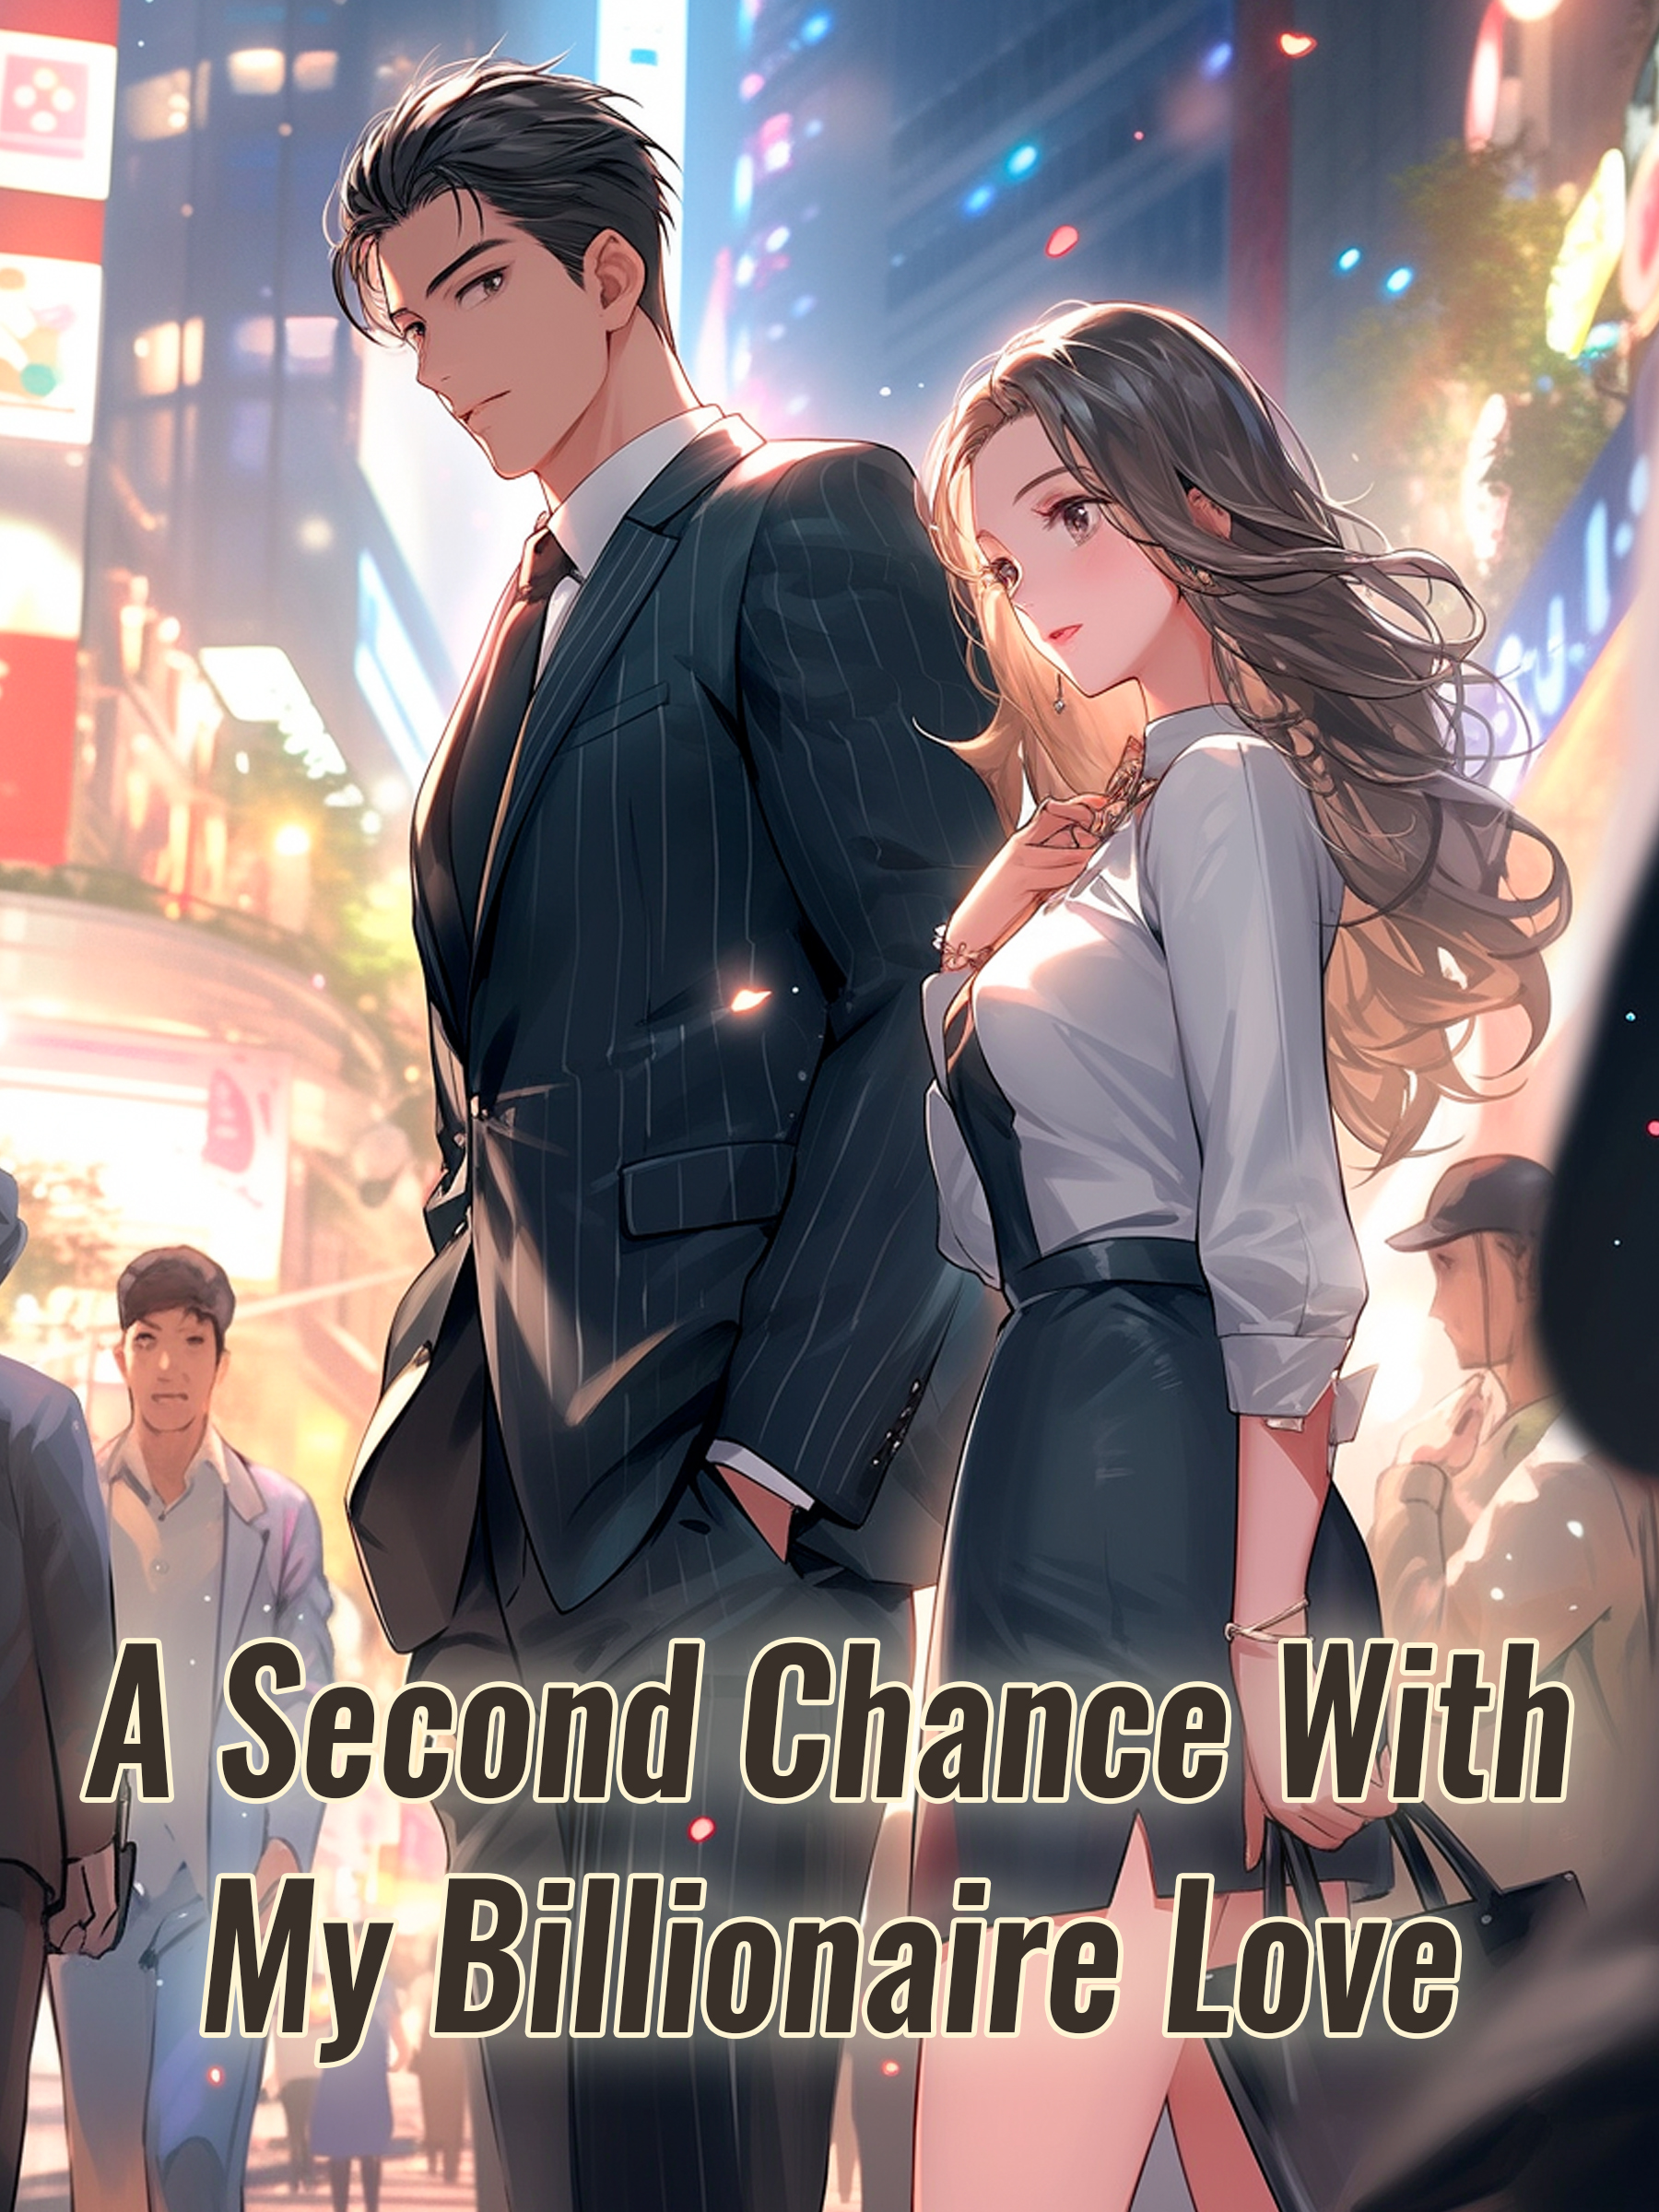 A second chance with my billionaire love